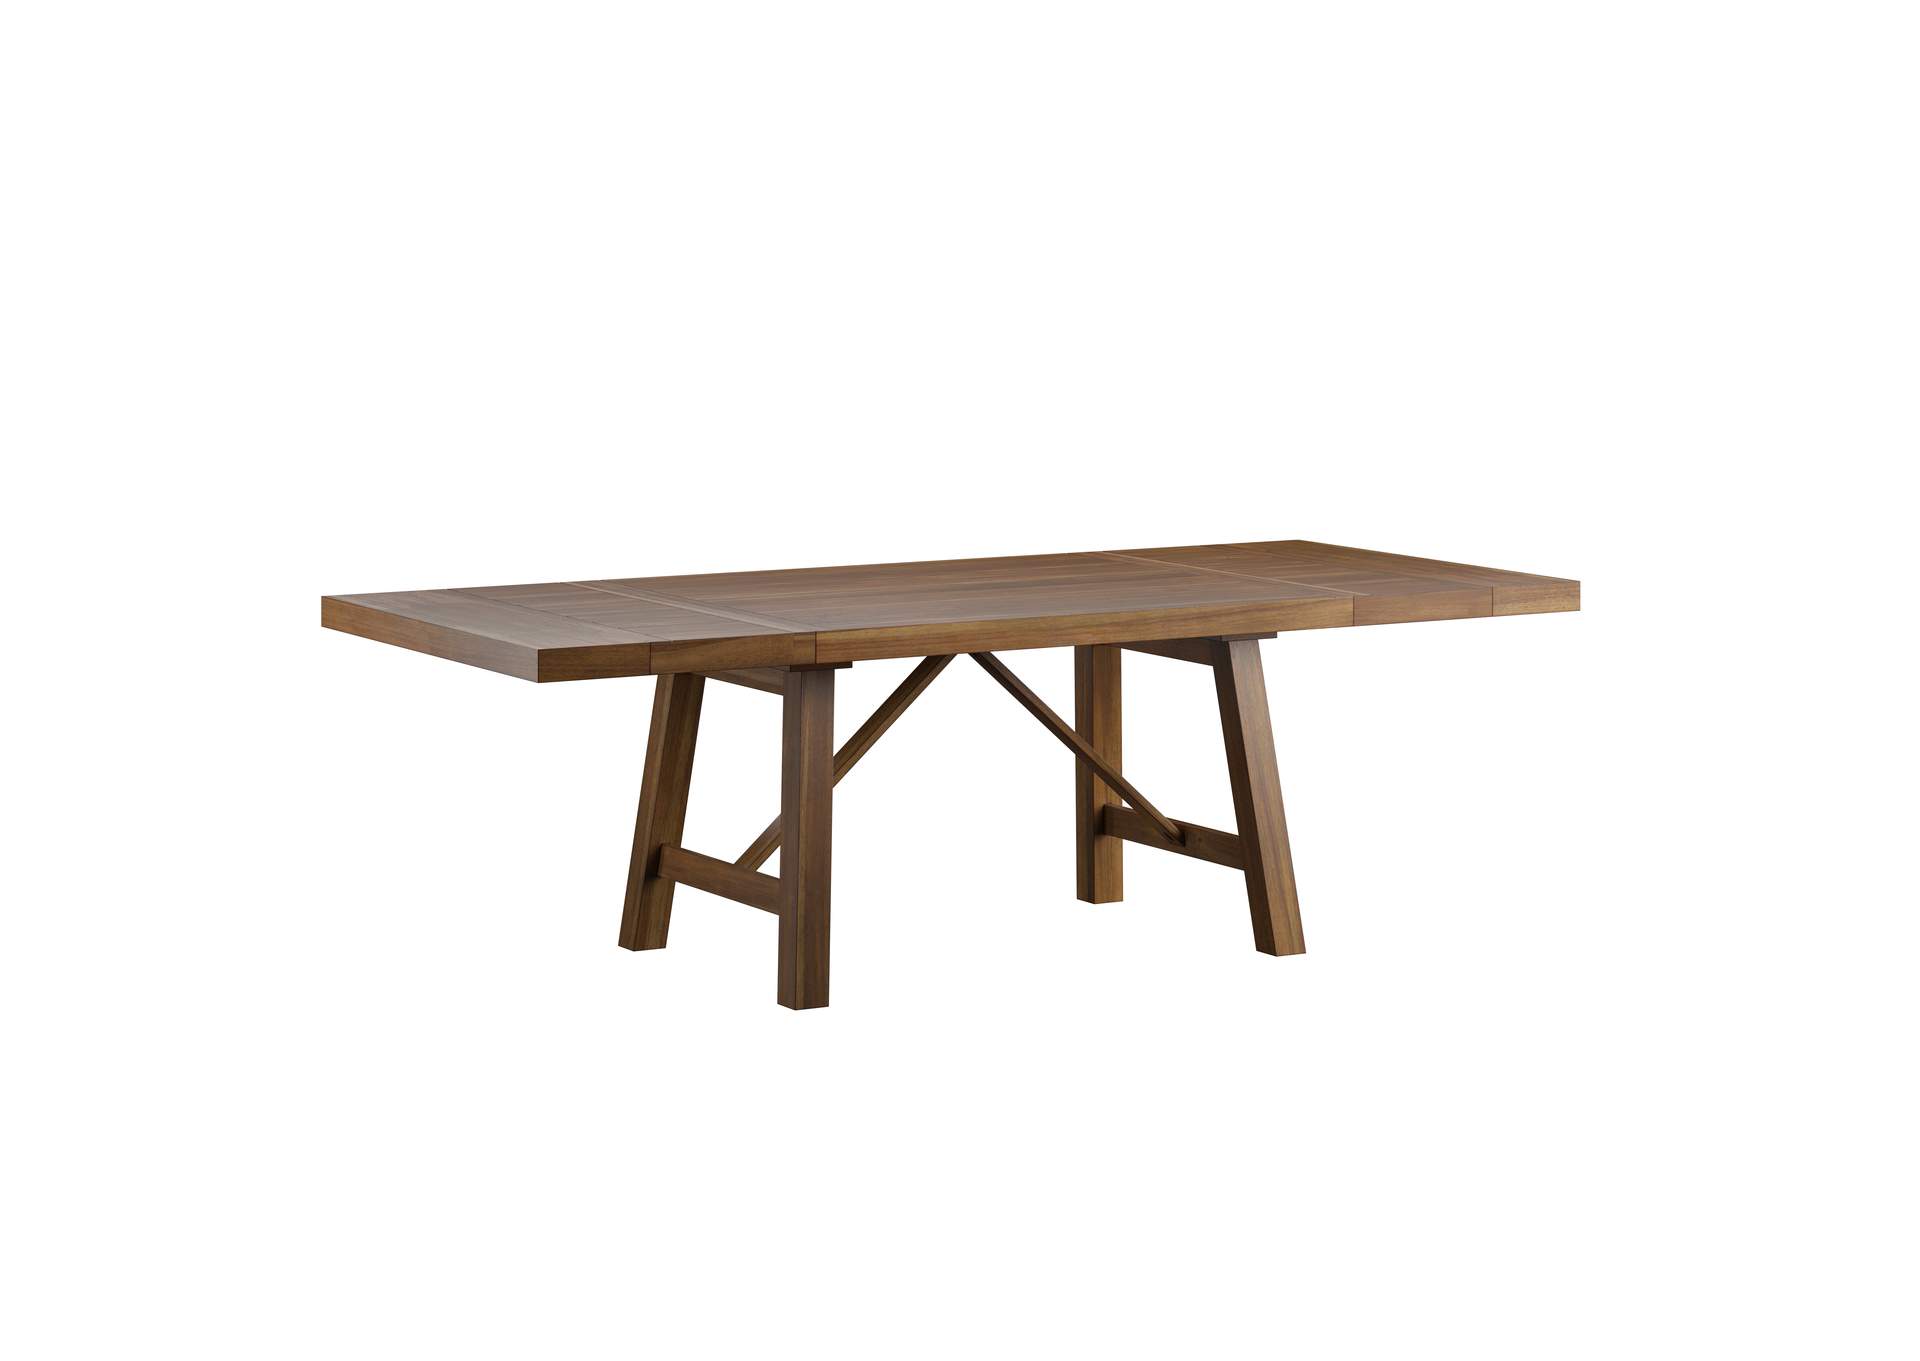 Darby Dining Table,Emerald Home Furnishings